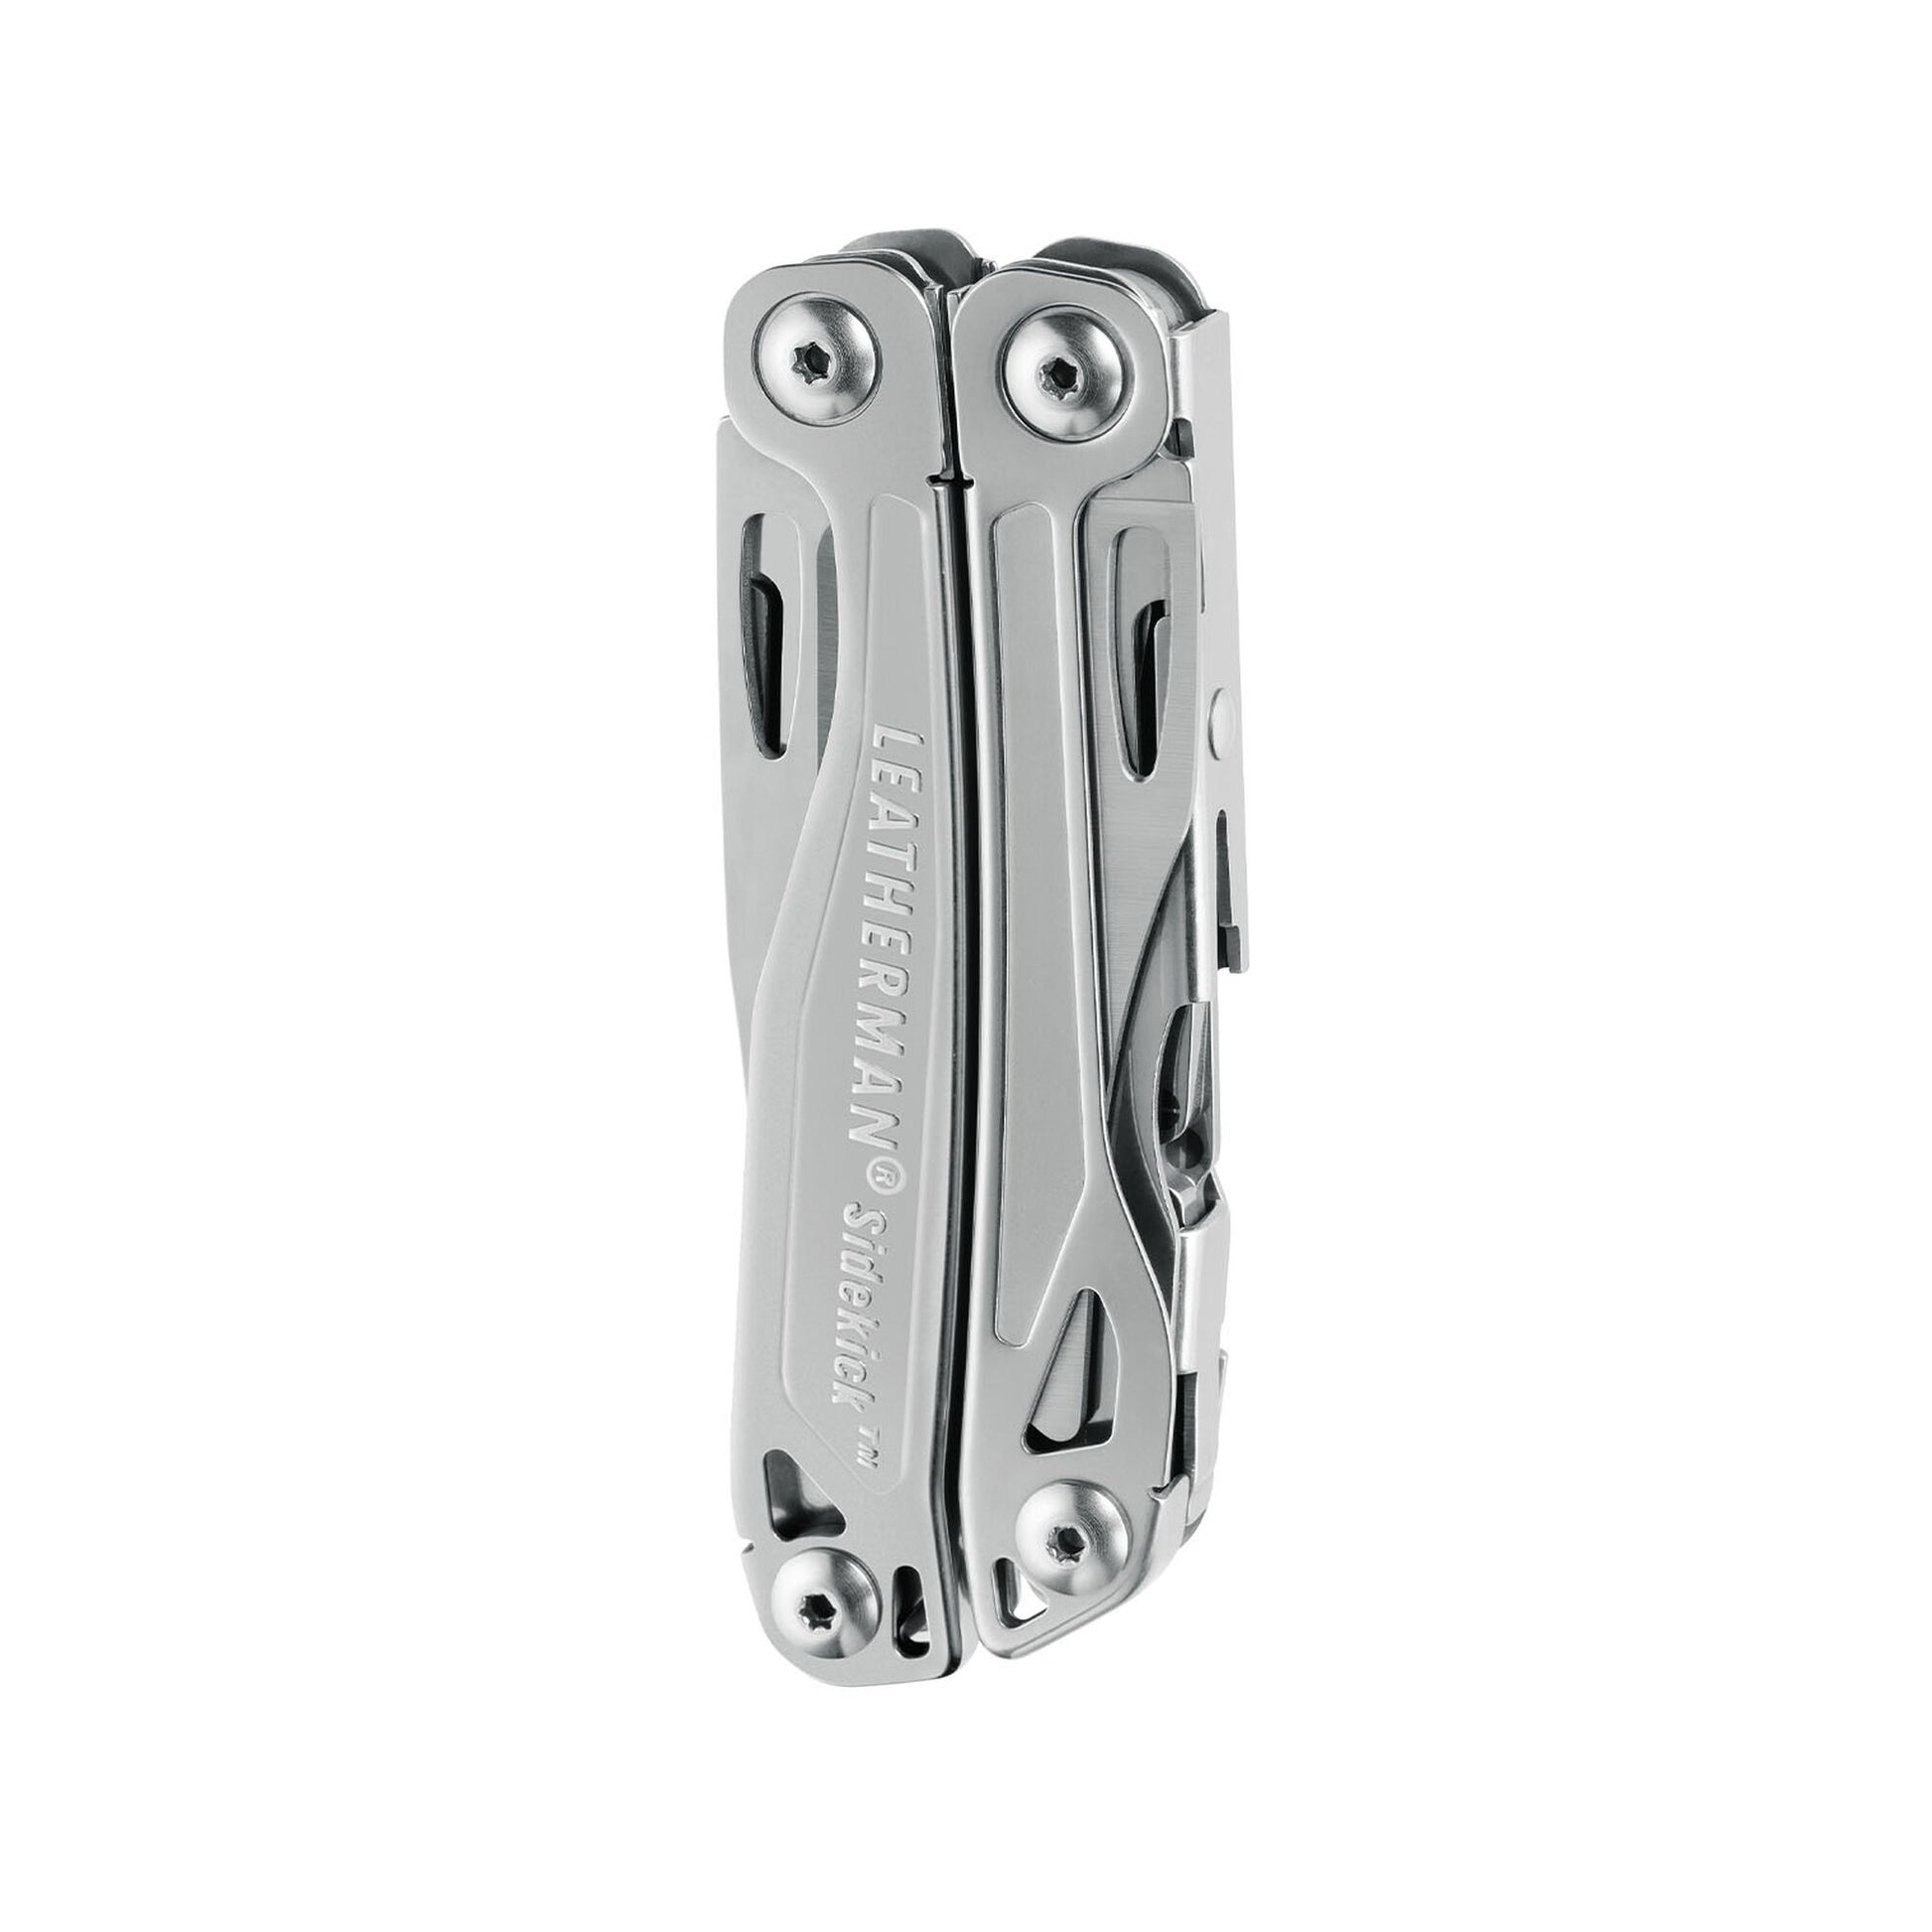 Pince Leatherman multifonctions Sidekick (14 outils) - Leatherman-T.A DEFENSE